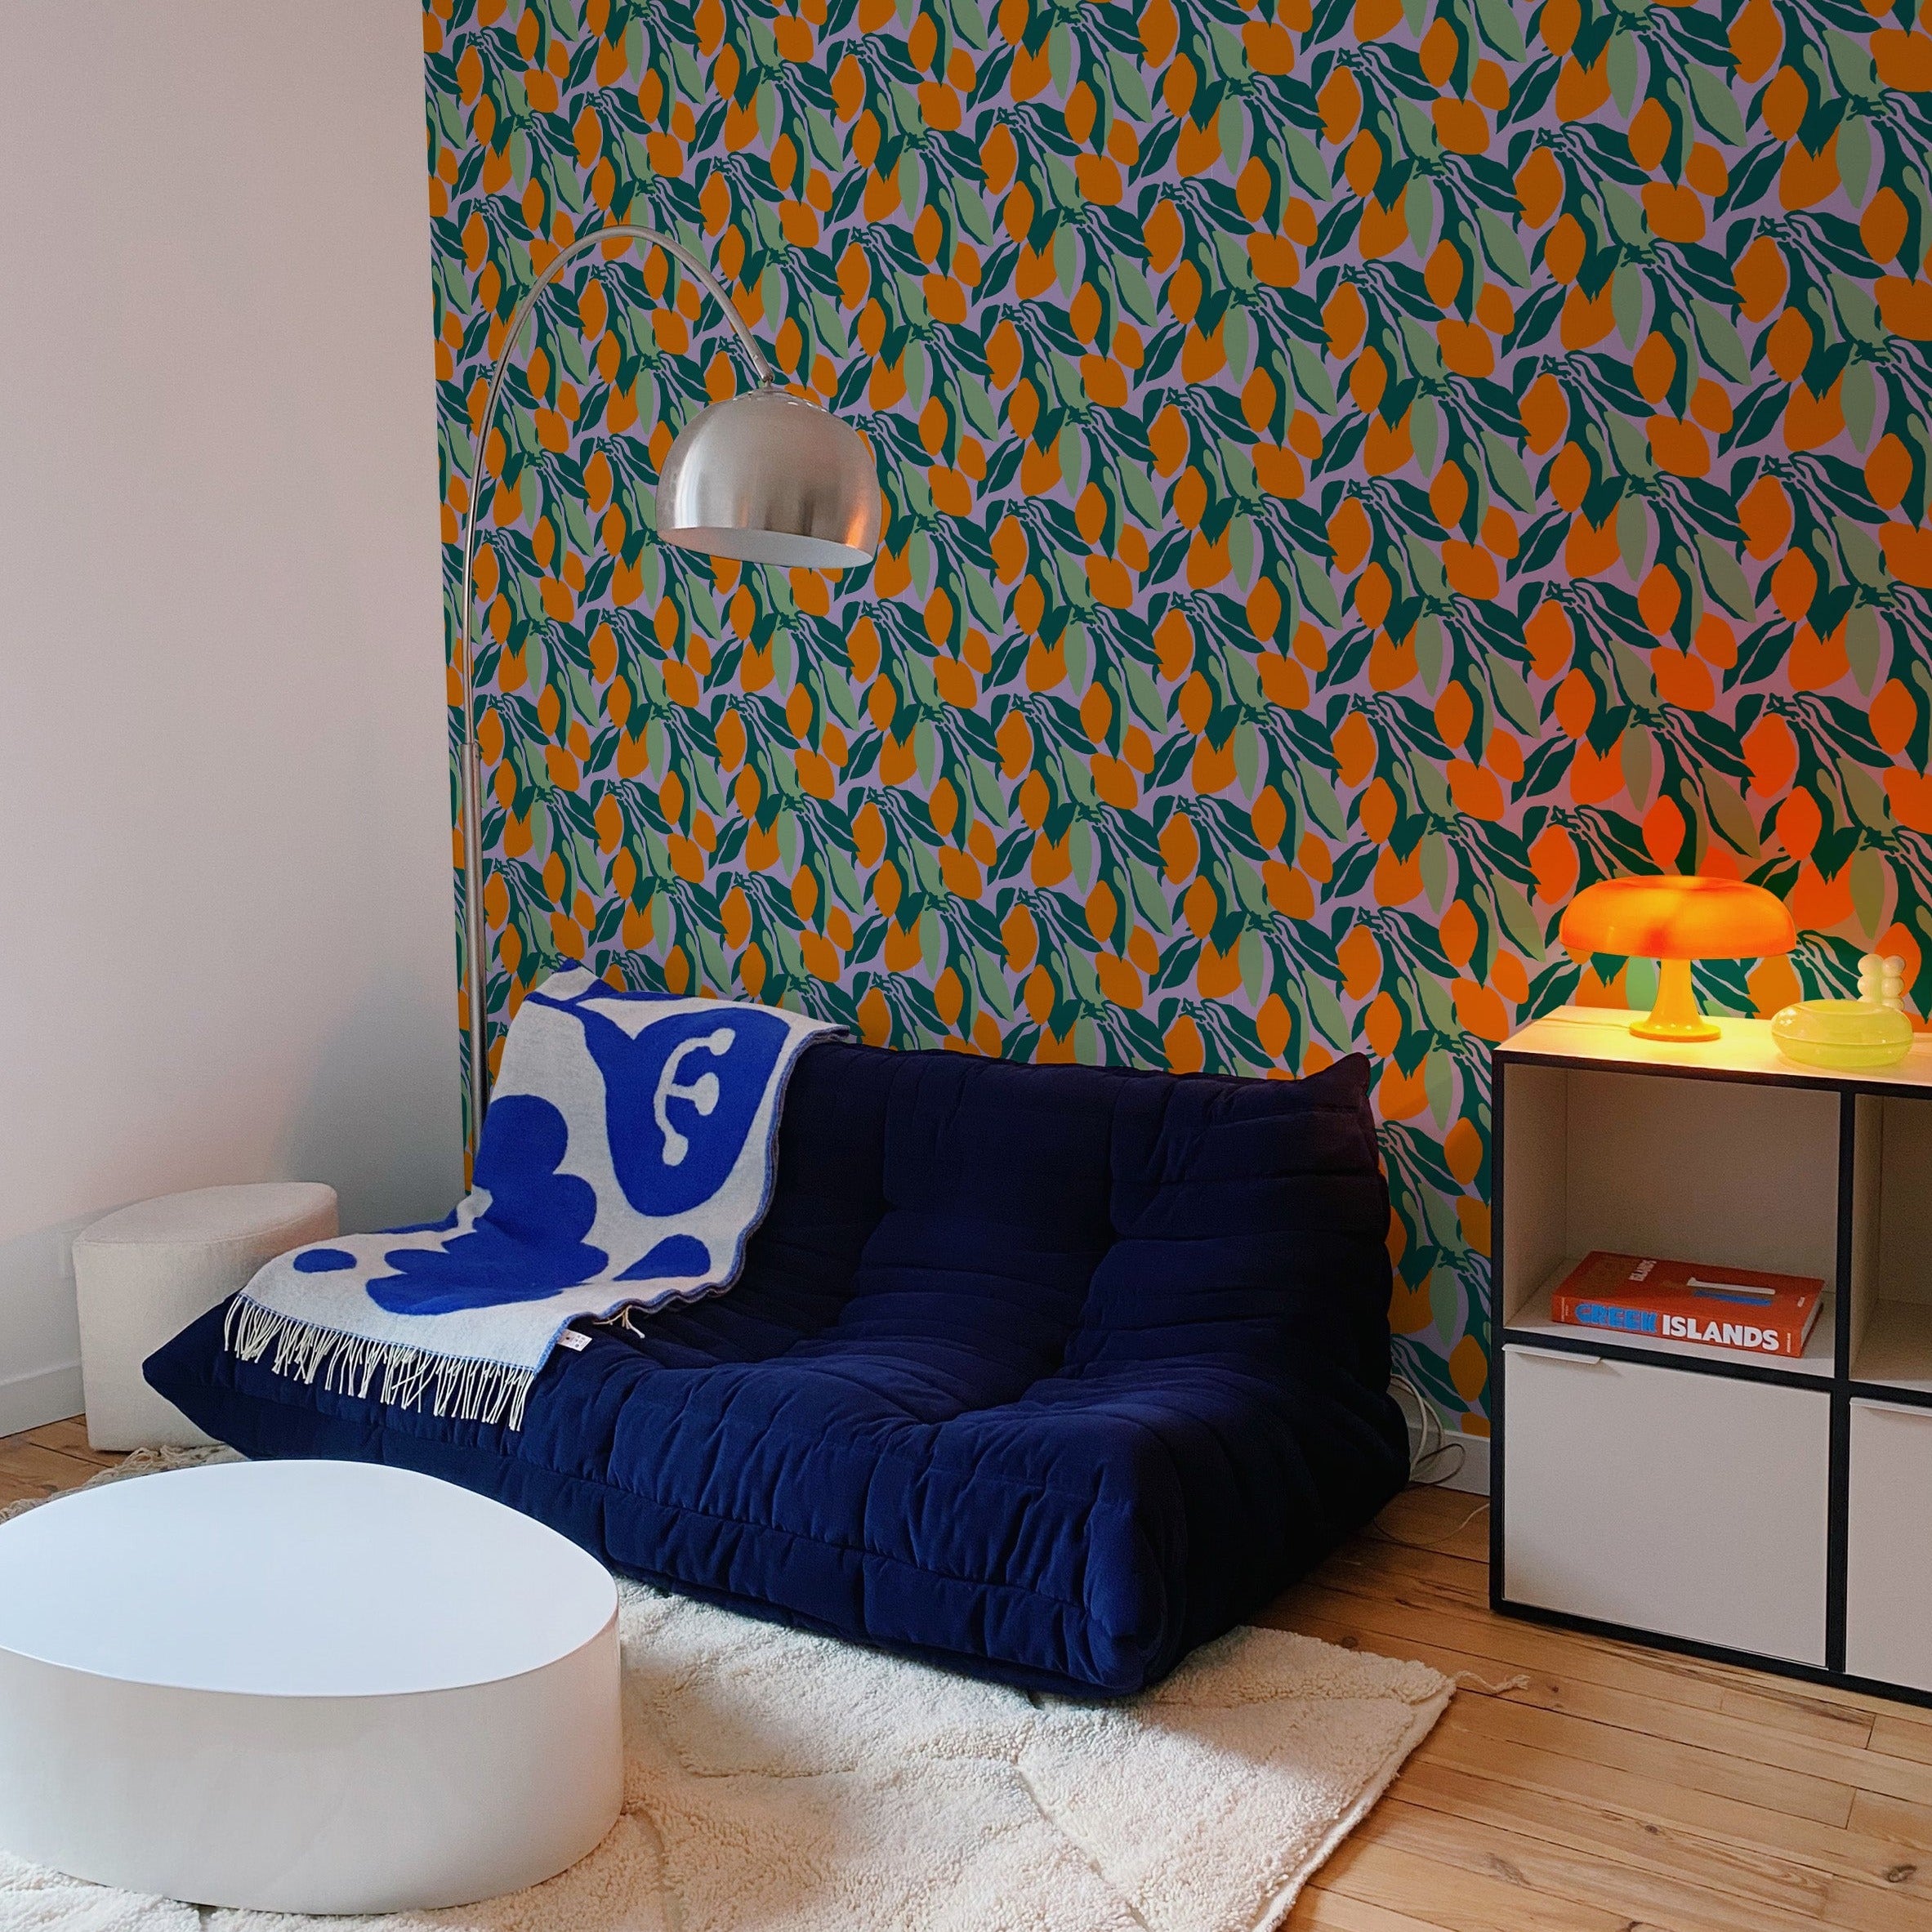 A modern living room featuring a wall covered in wallpaper with a pattern of orange fruits and green leaves on a purple background. The room includes a navy blue sofa, a round white coffee table, and various modern decorations, creating a vibrant and stylish space